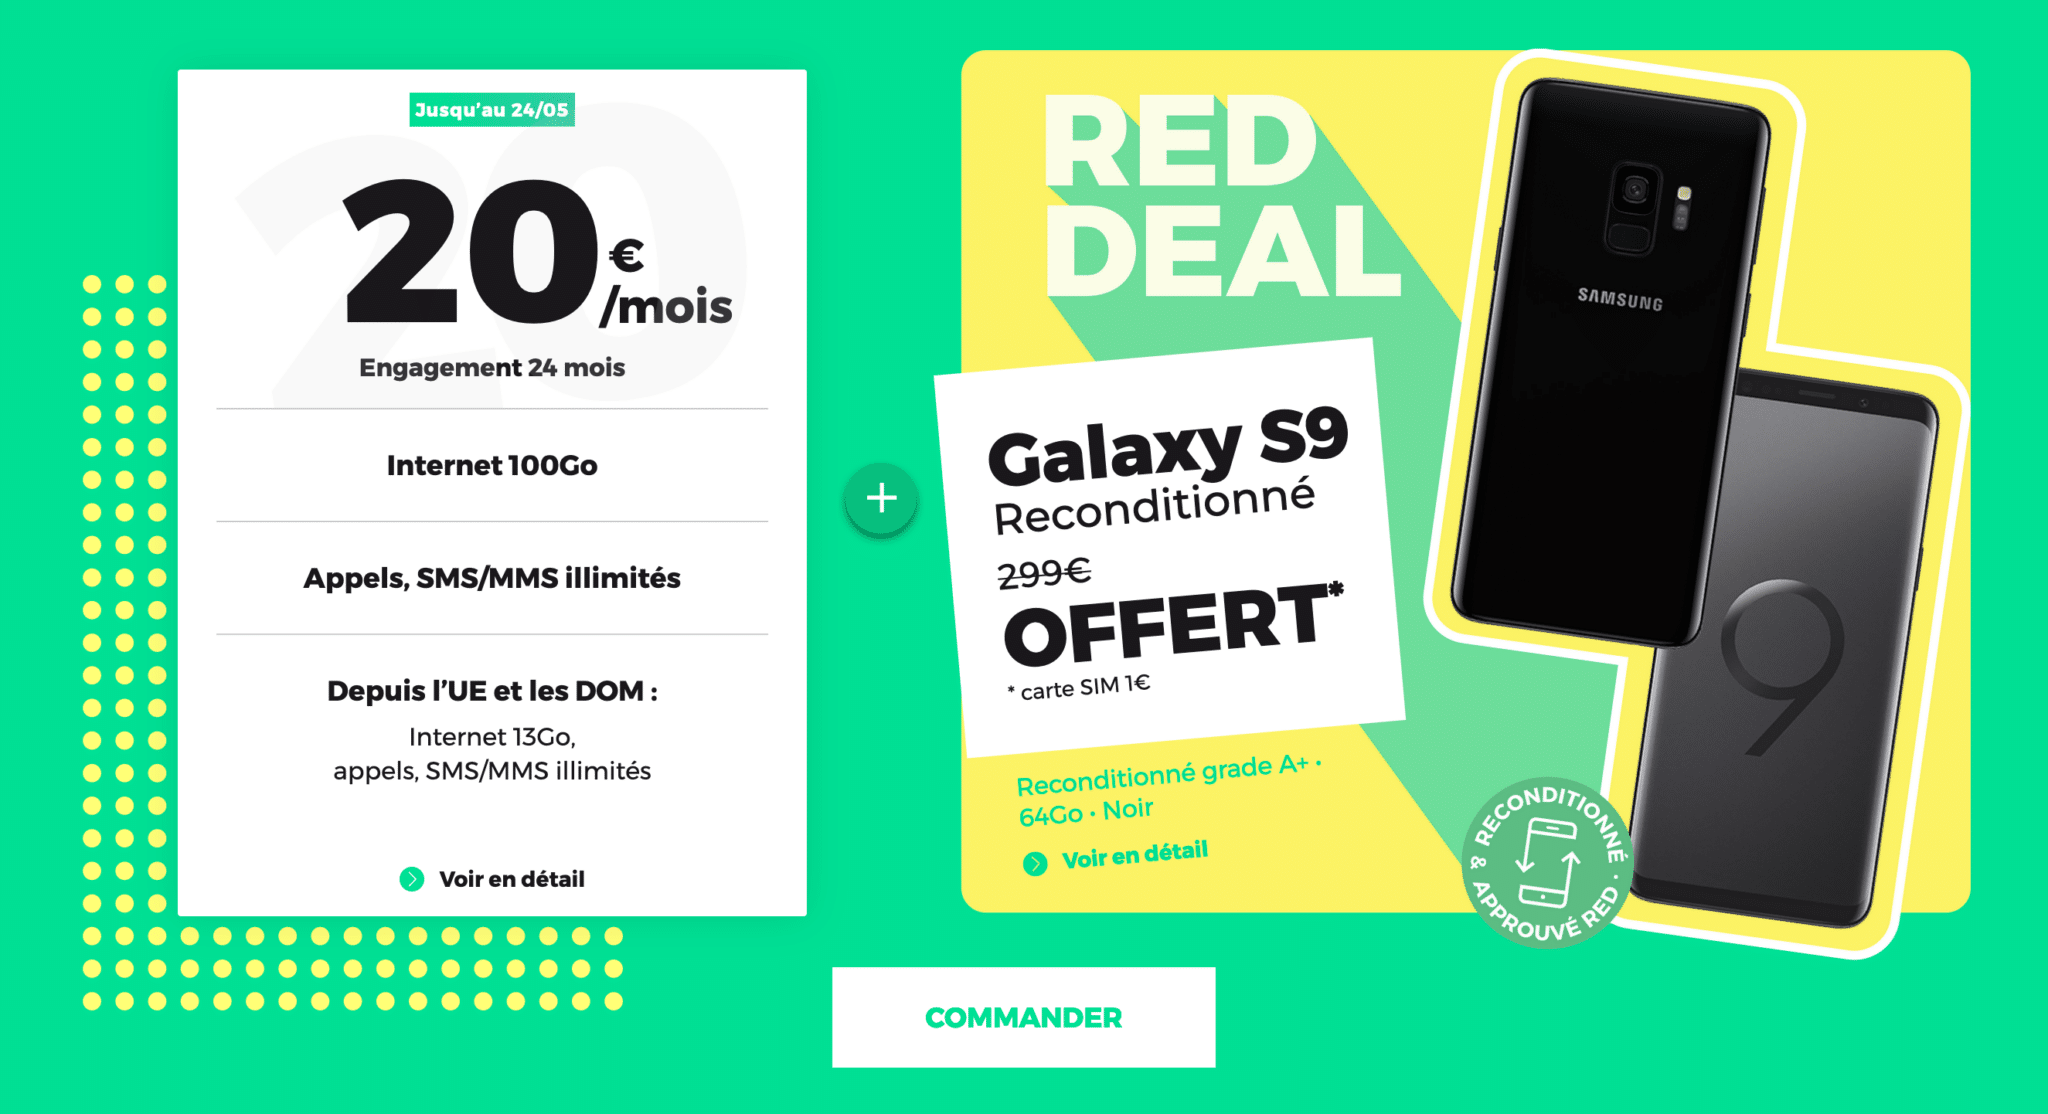 RED Deal Galaxy S9